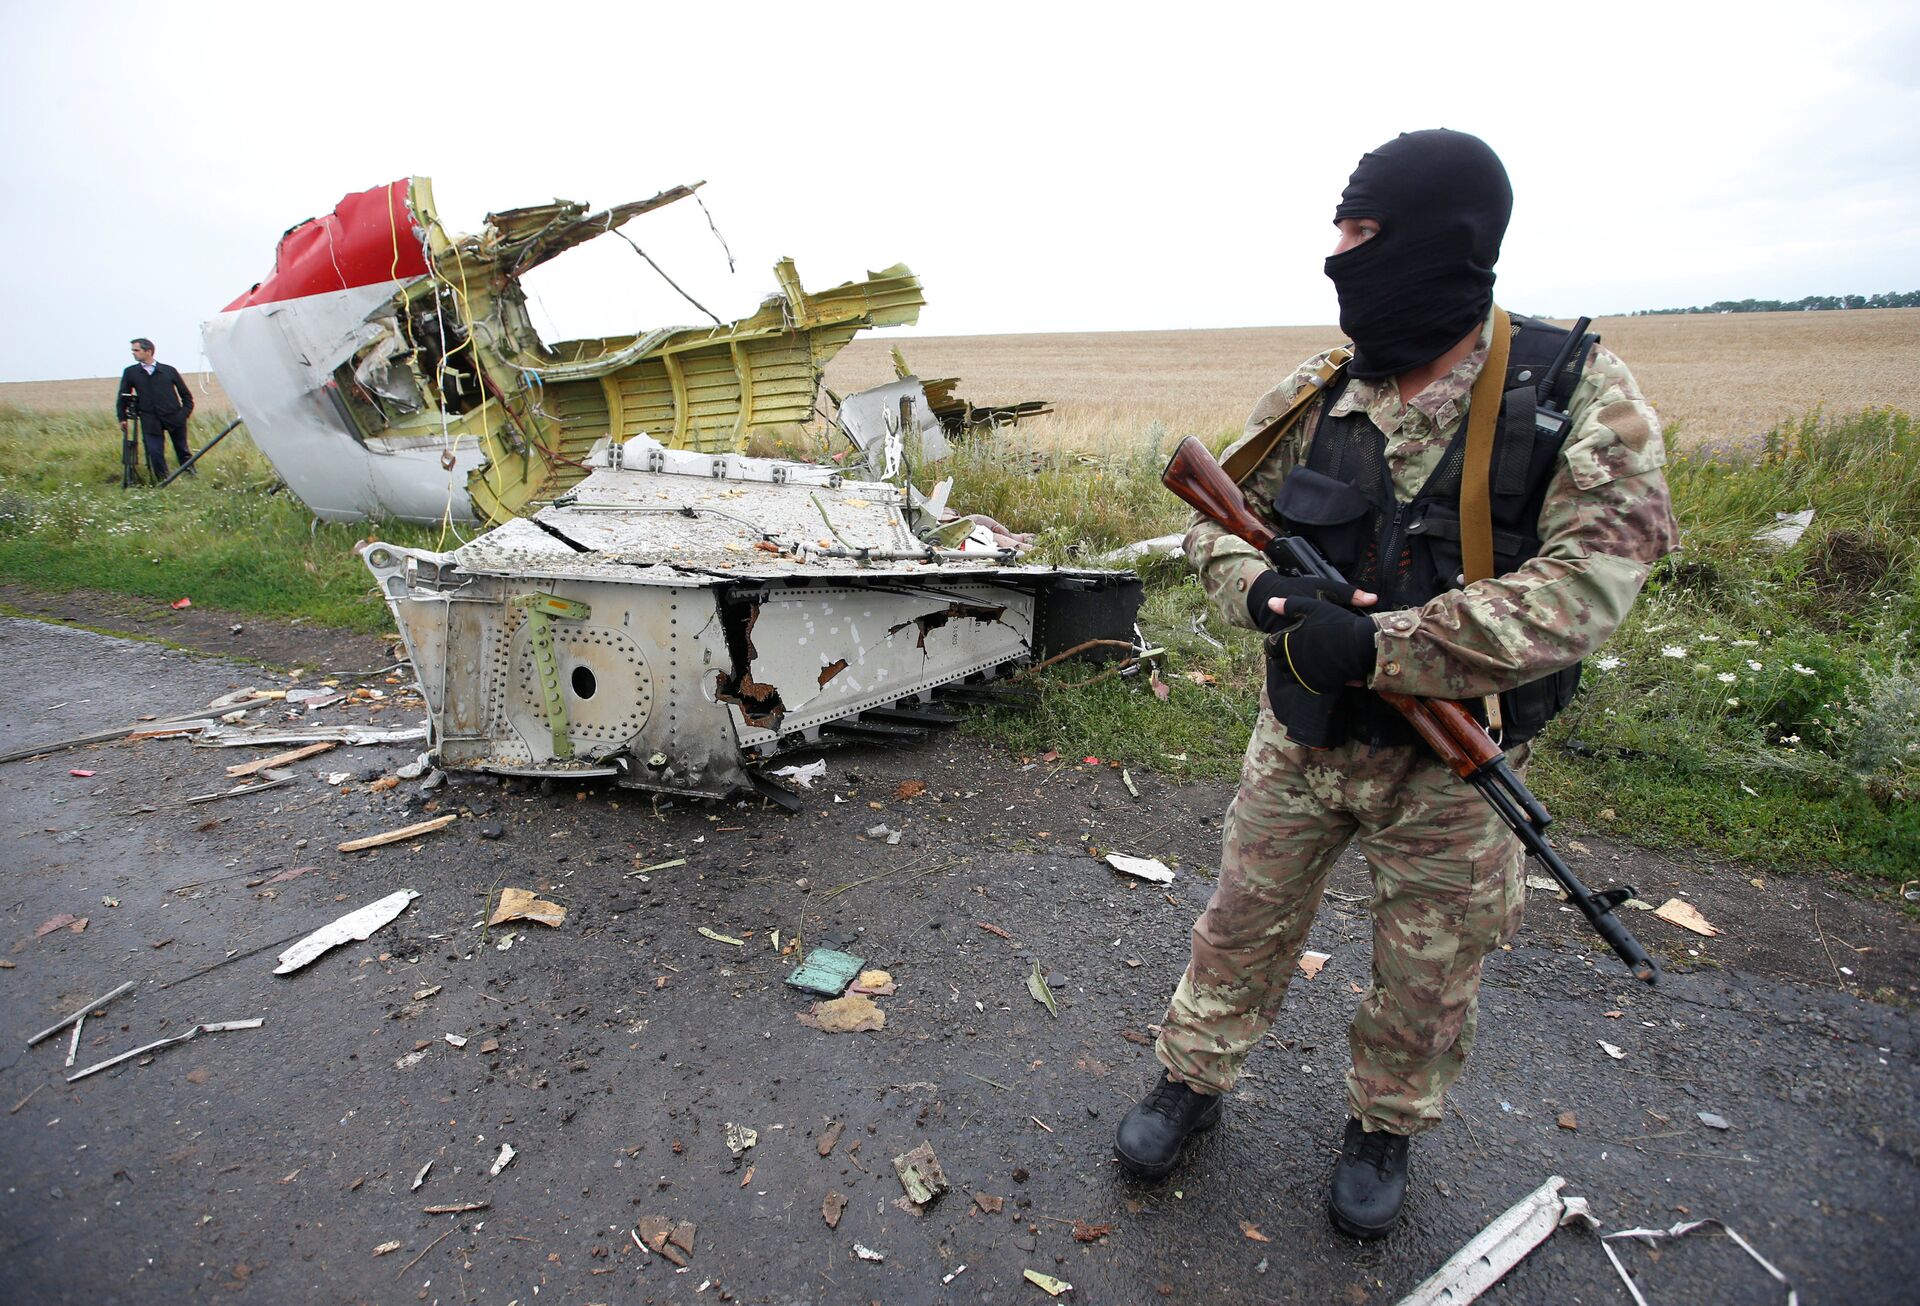 A member of the self-defence unit stands at the crash site of Malaysia Airlines Flight MH17, near the village of Hrabove (Grabovo) in the Donetsk region - Sputnik International, 1920, 21.12.2021